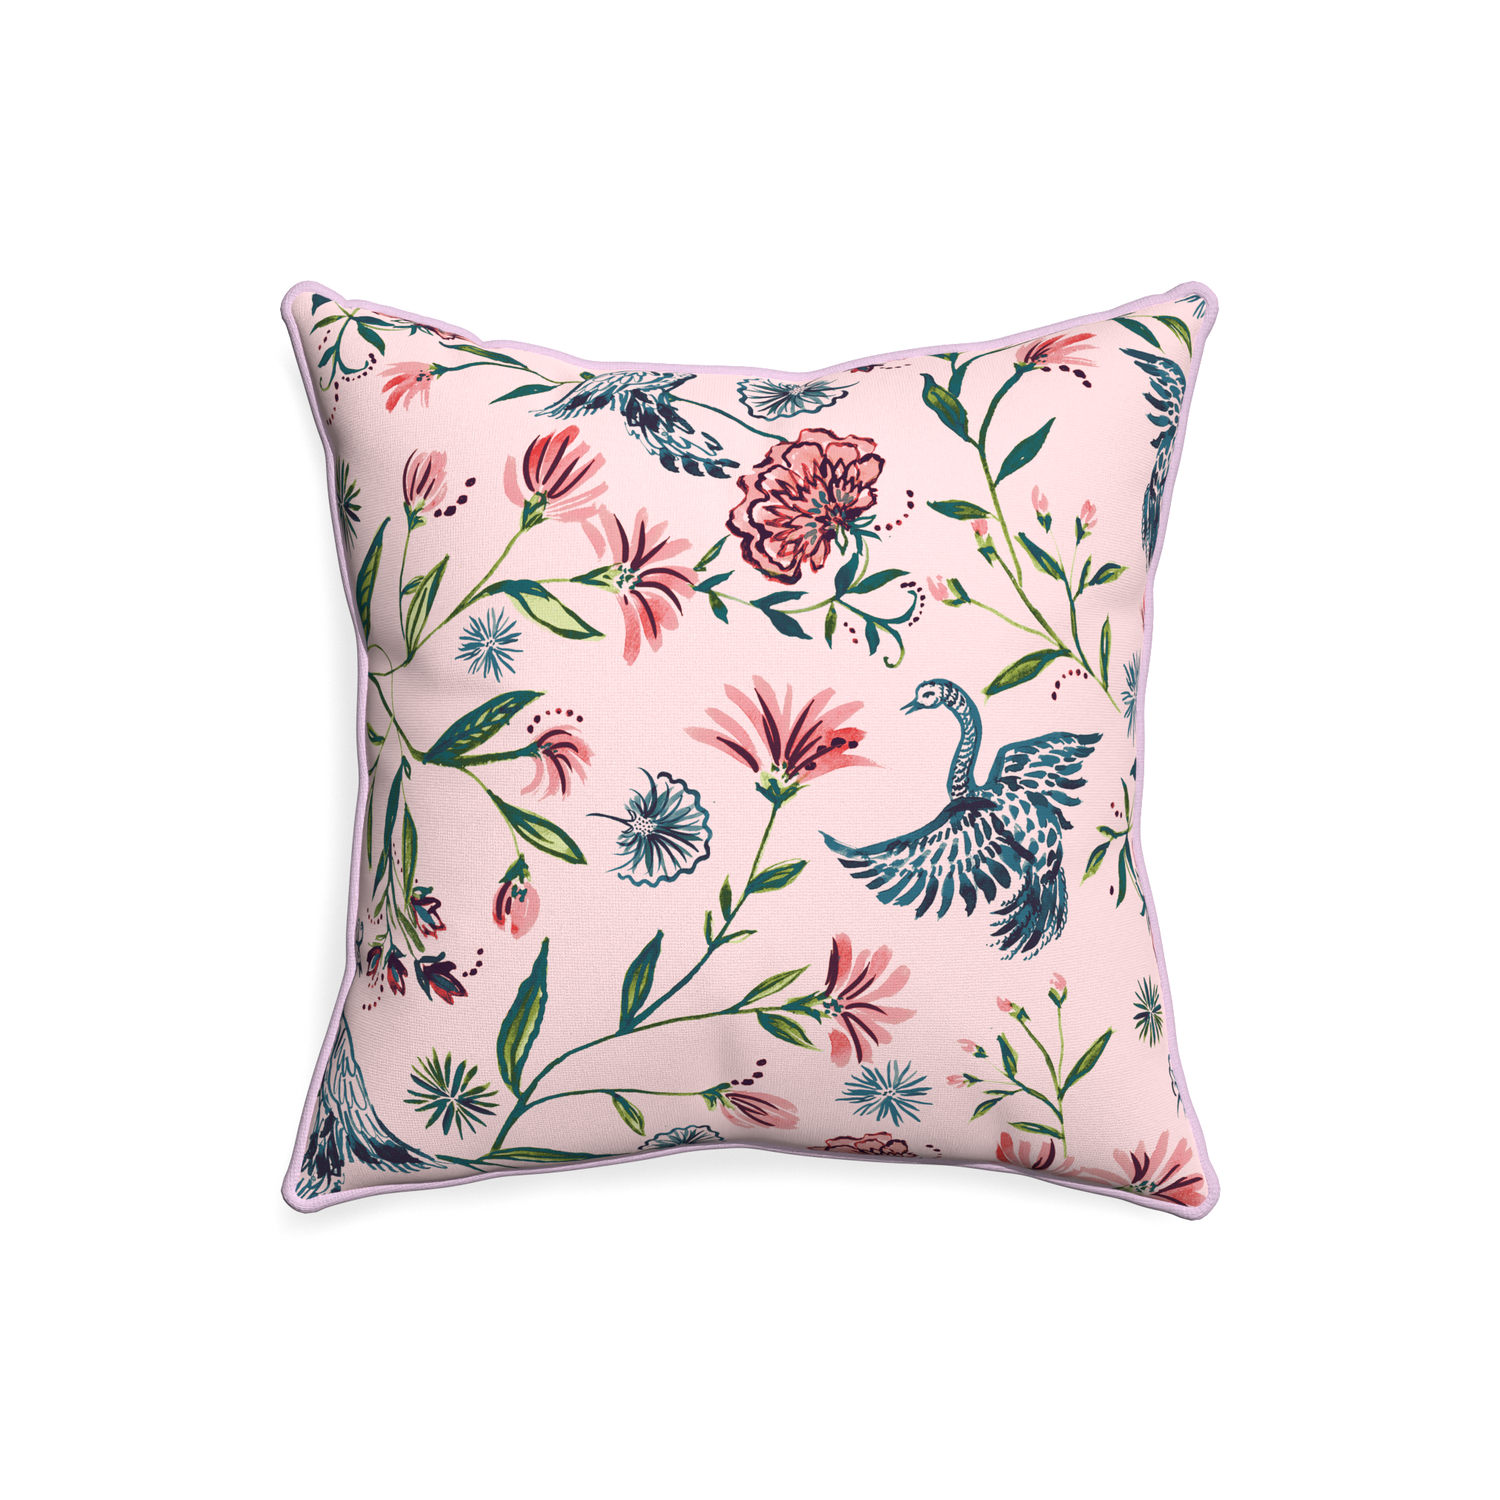 20-square daphne rose custom pillow with l piping on white background